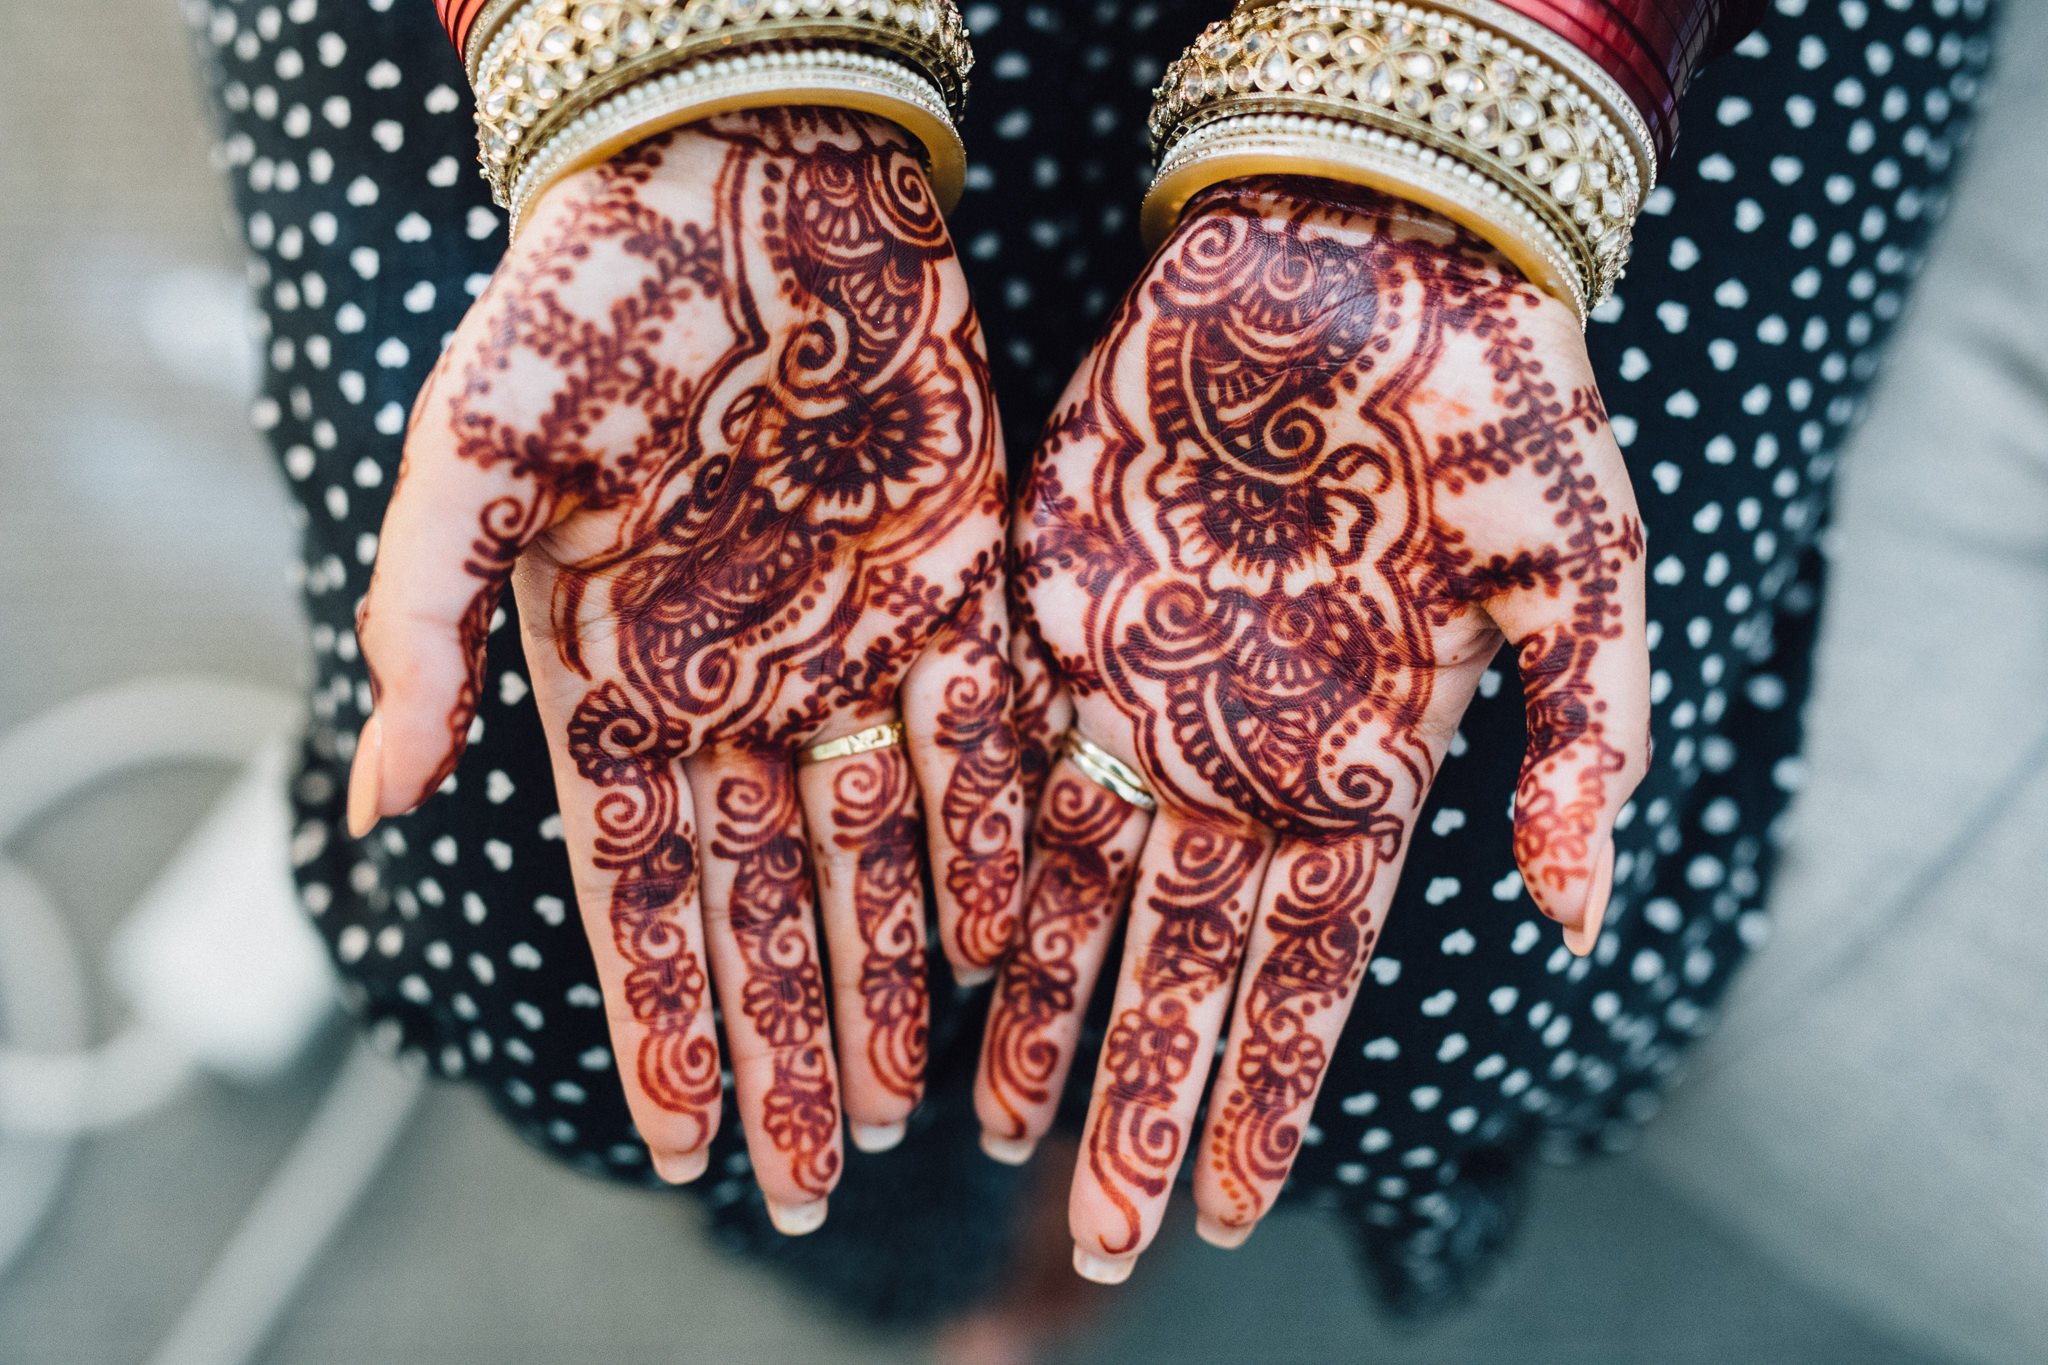  Bride’s hands with henna tattoos  